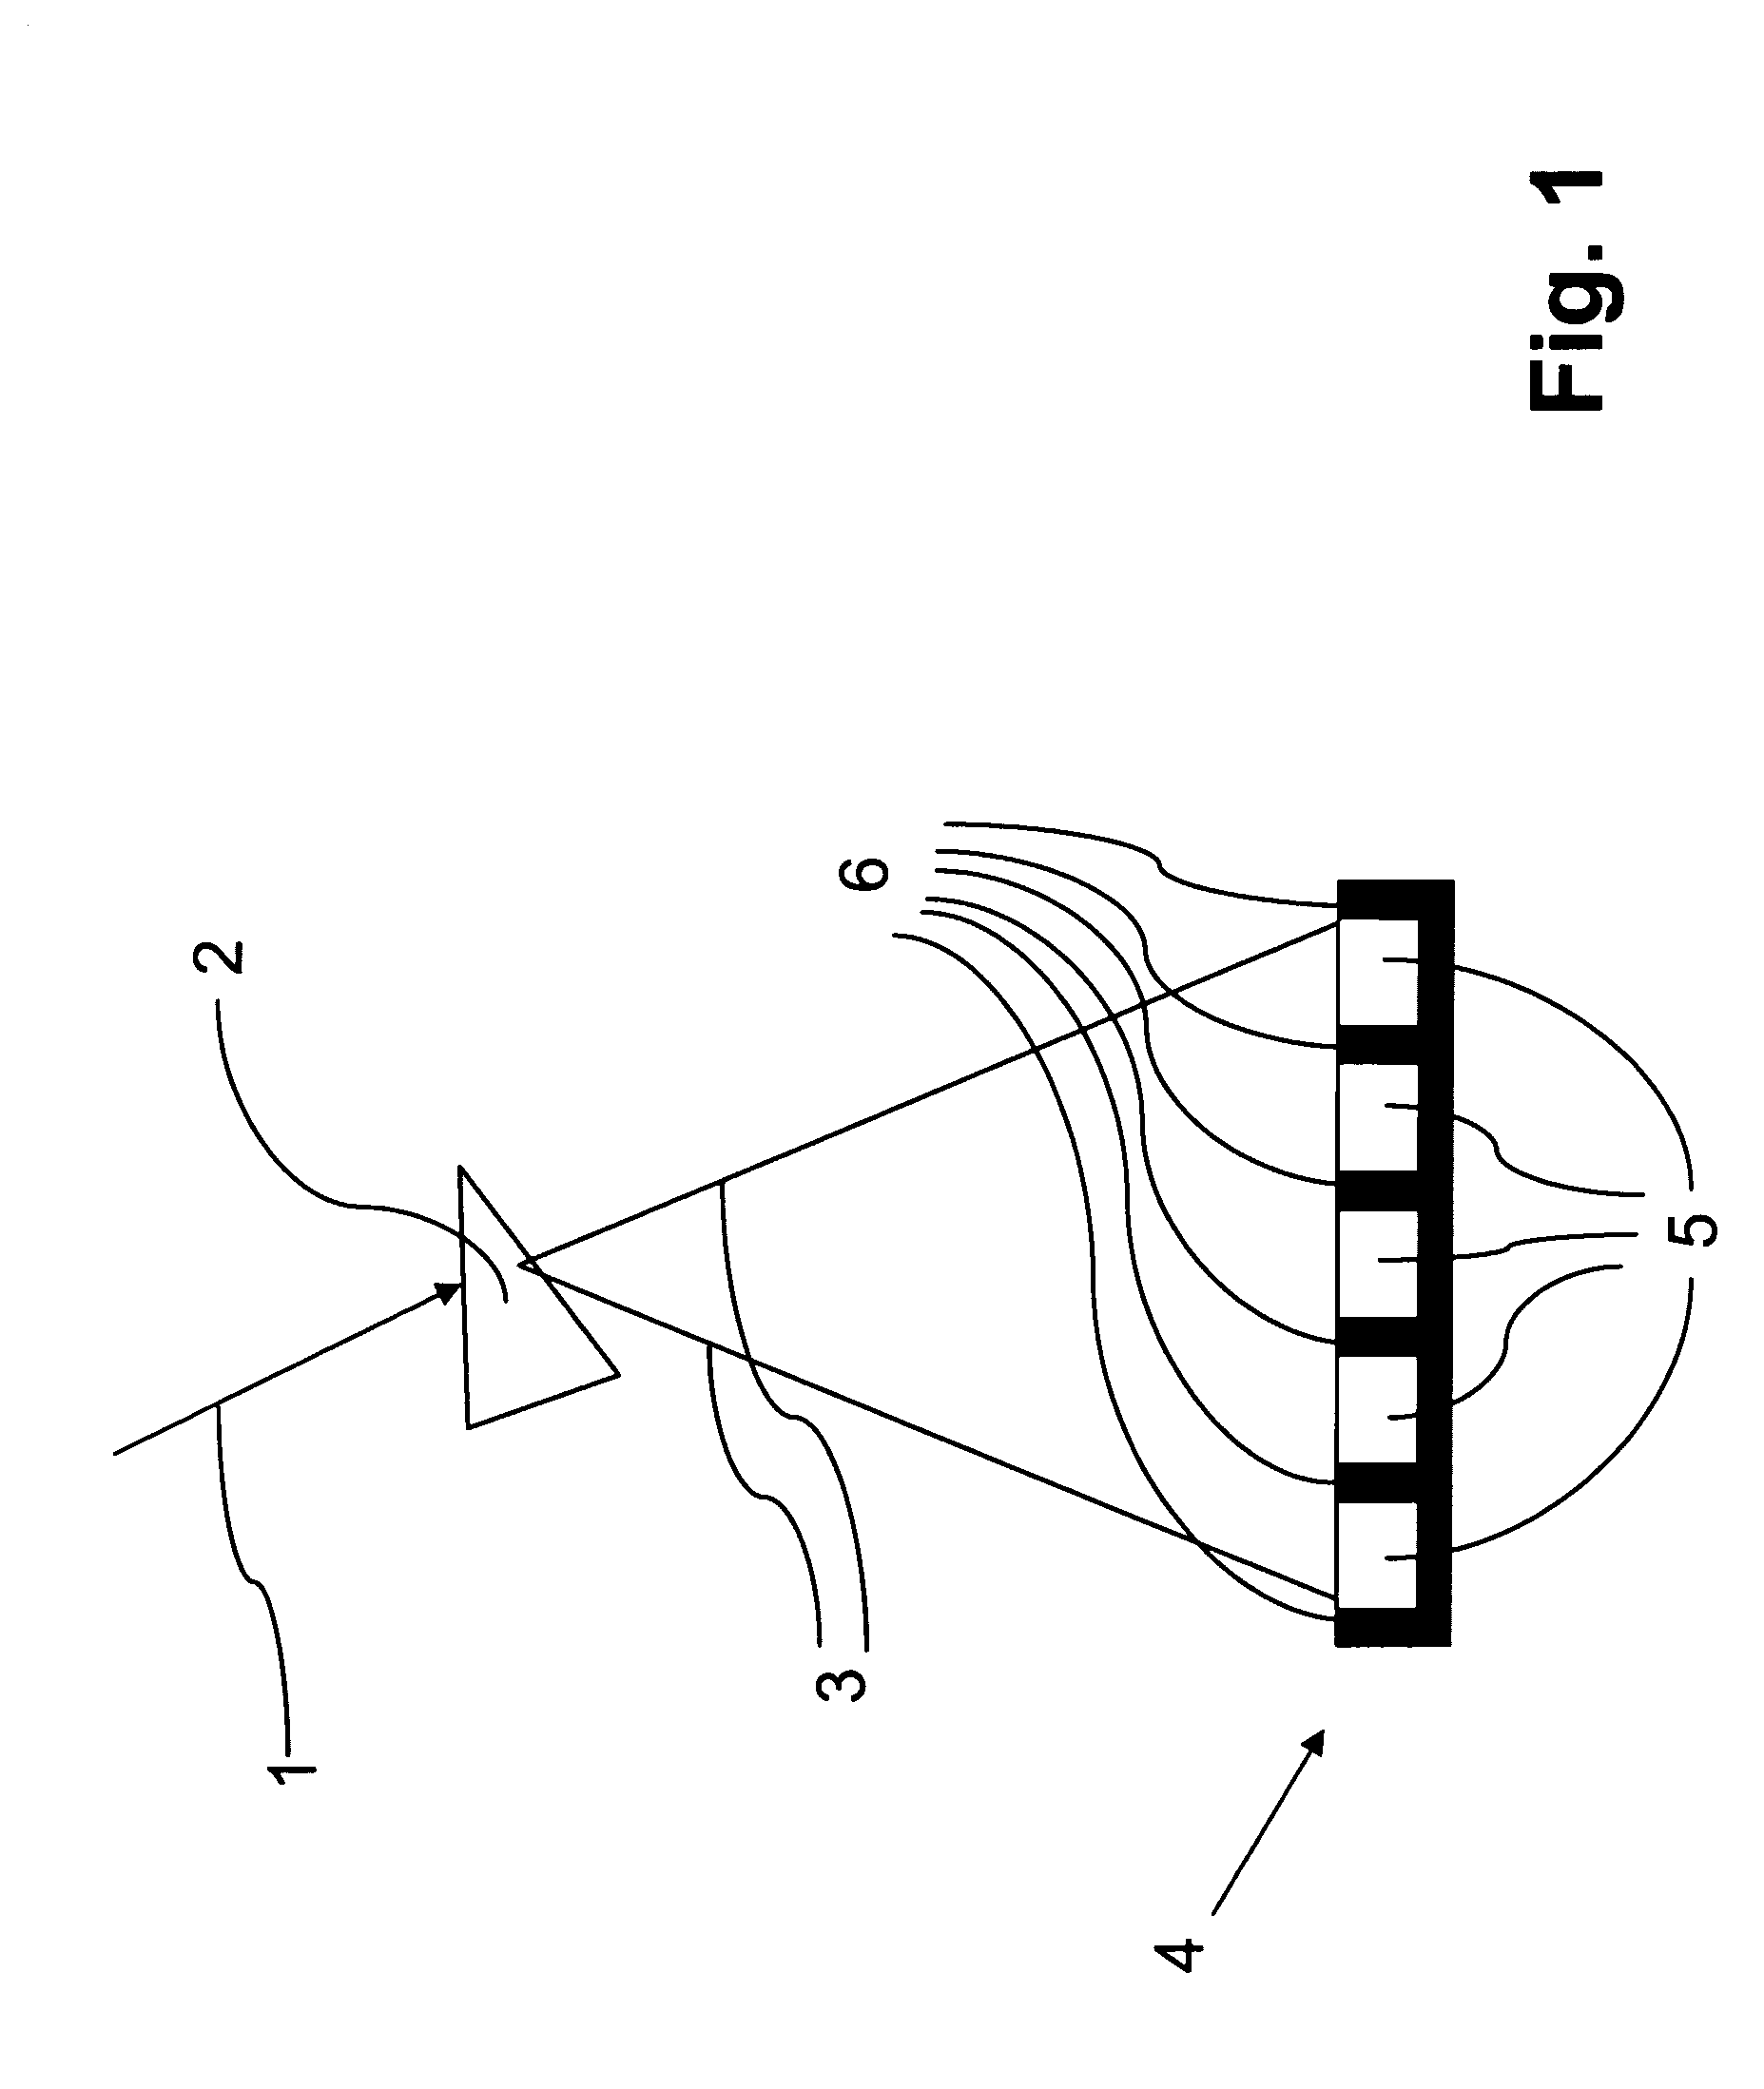 Device for selectively detecting specific wavelength components of a light beam